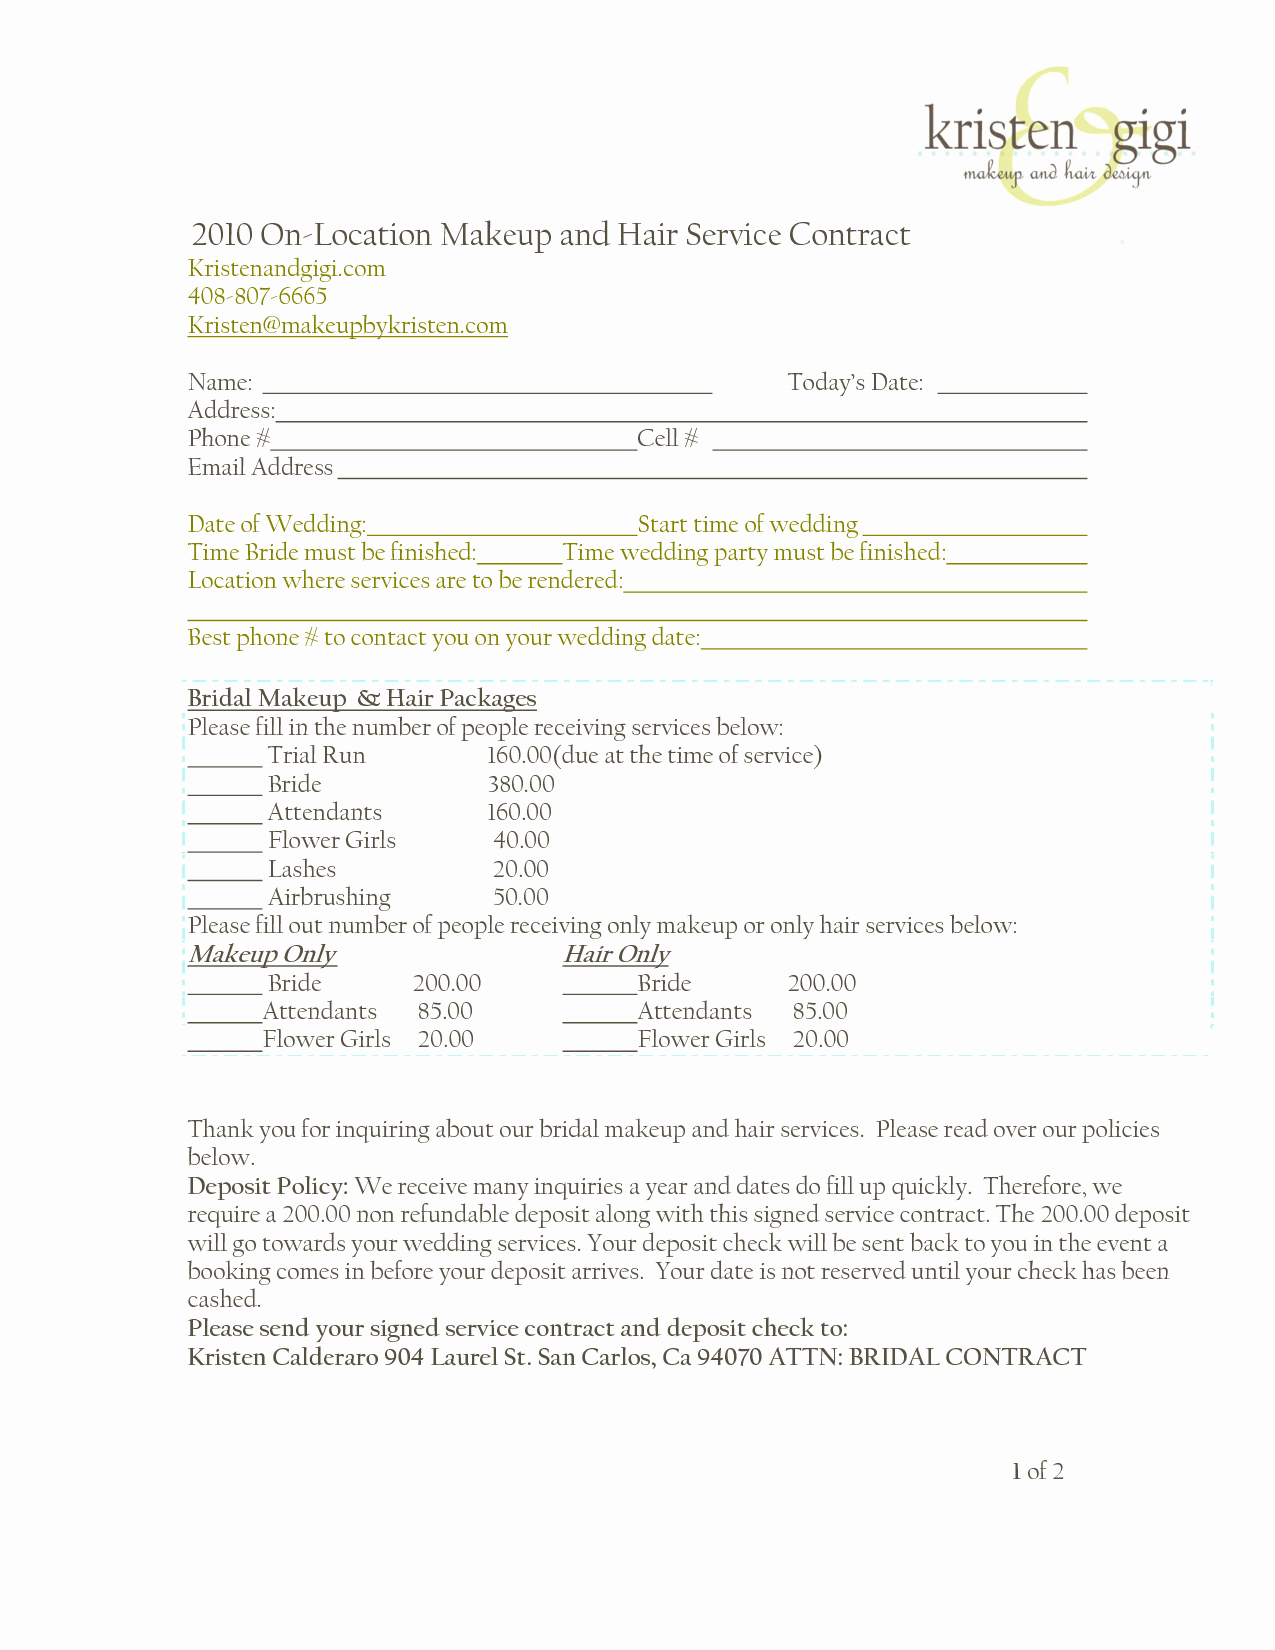 Freelance Makeup Artist Contracts New Bridalhaircotract